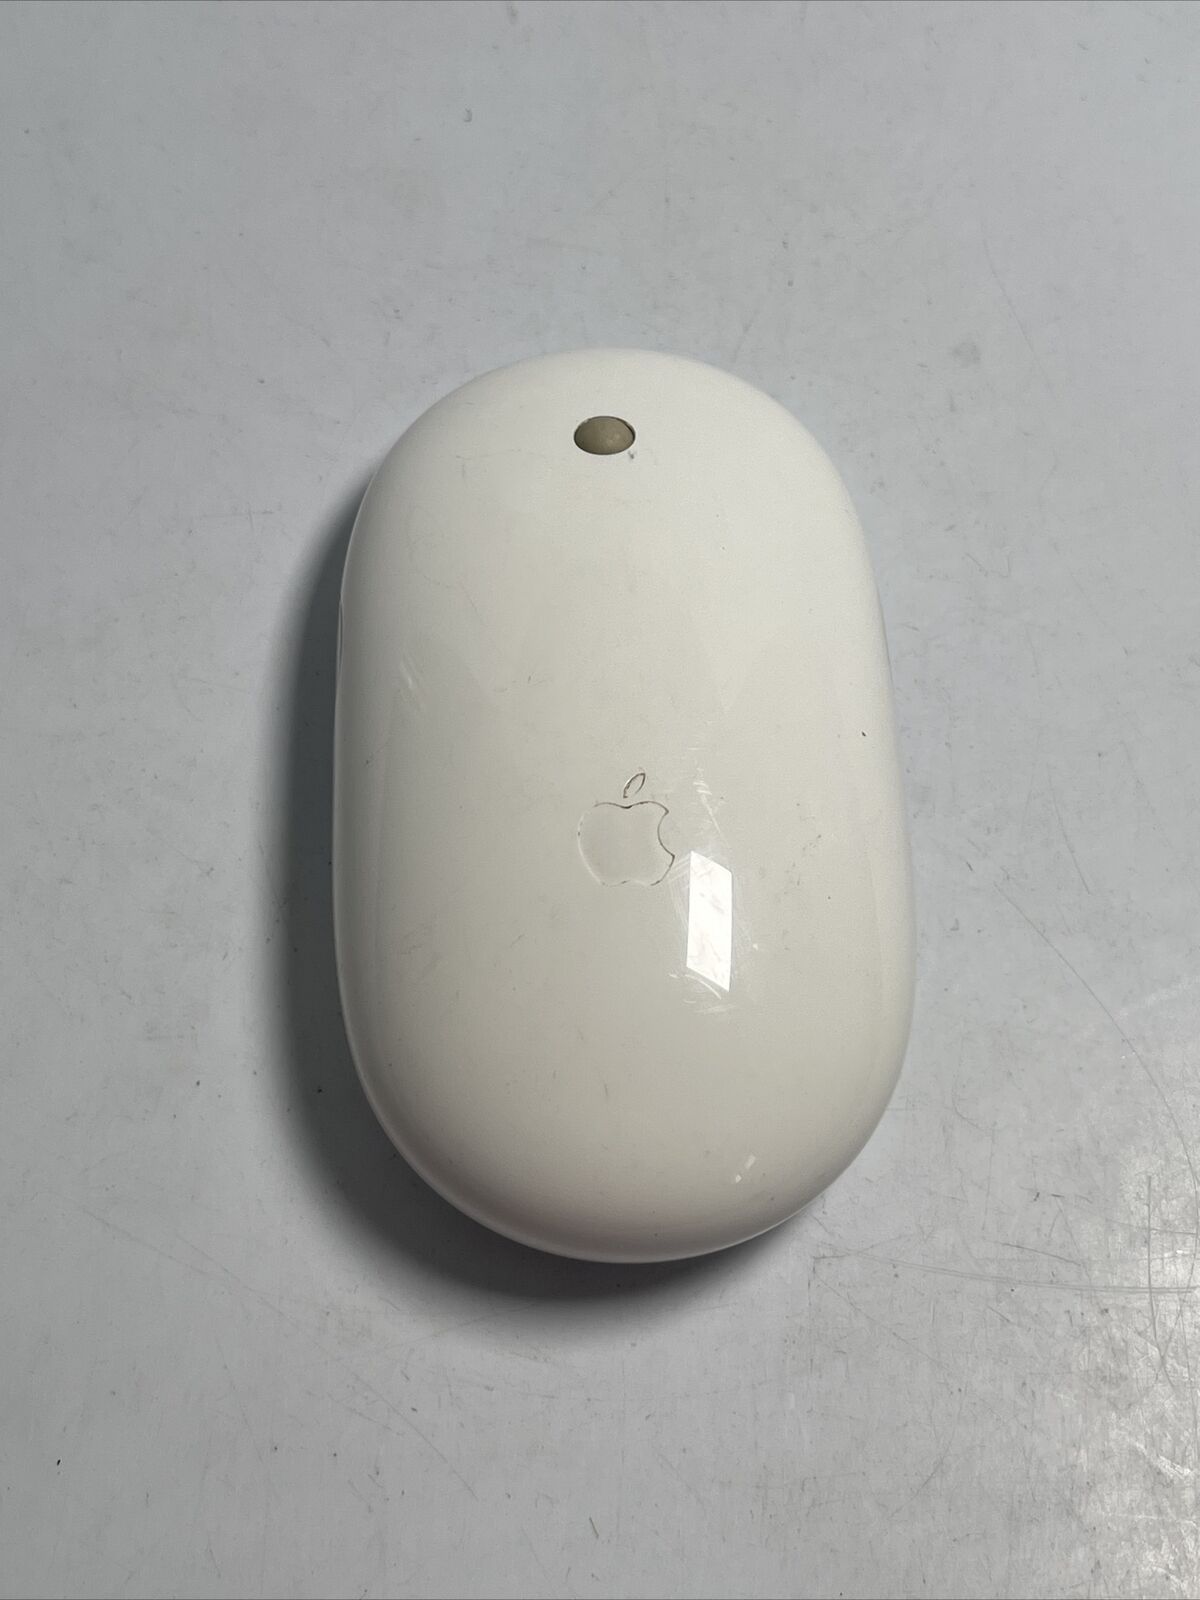 Apple A1197 Wireless Mighty Mouse MA272LL/A Bluetooth Wireless White Tested